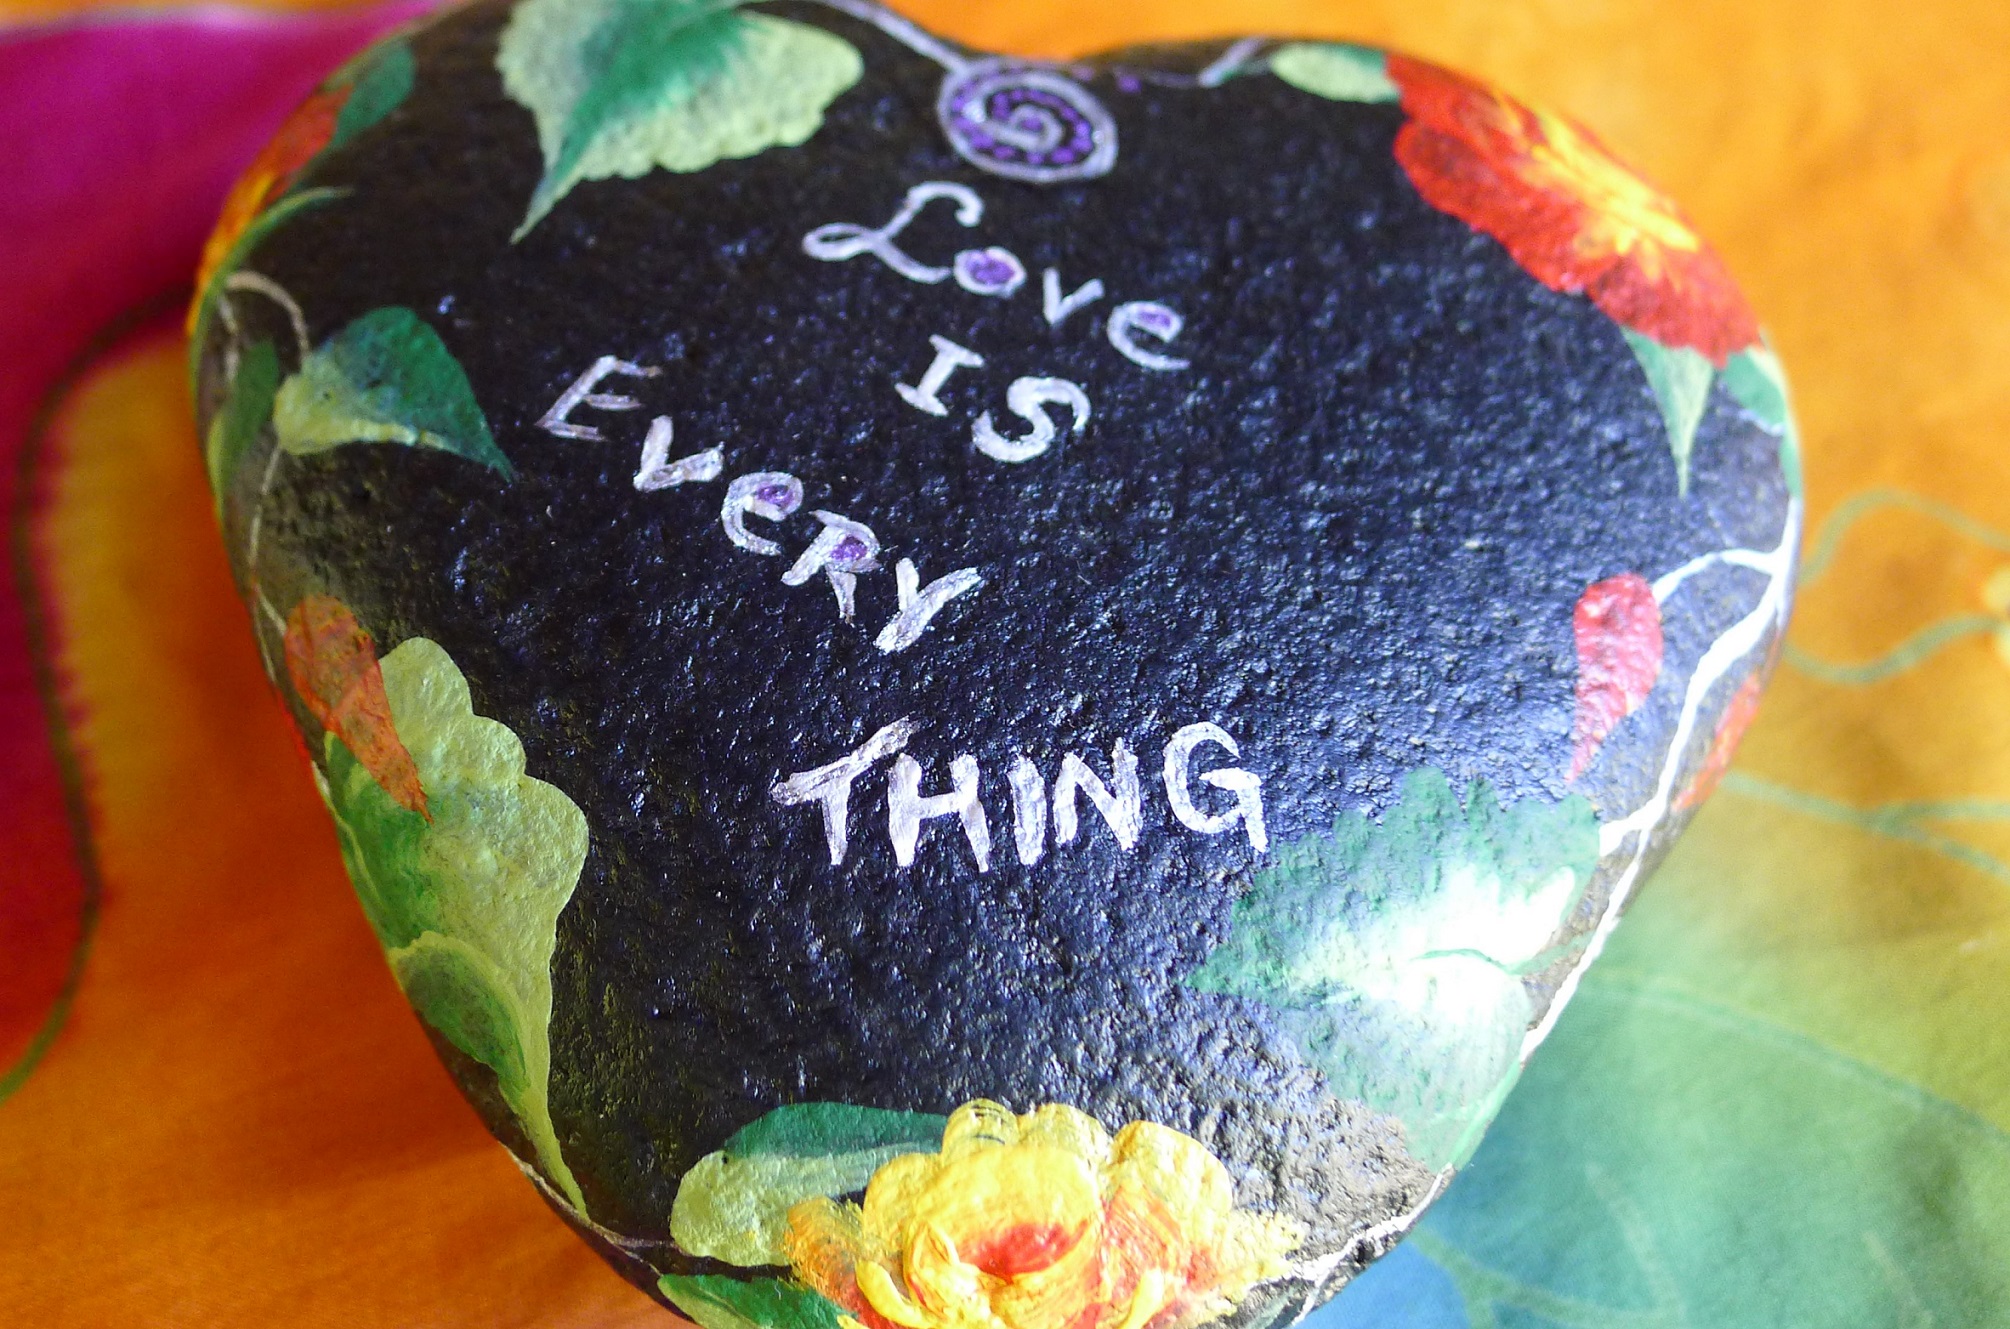 Love is everything!